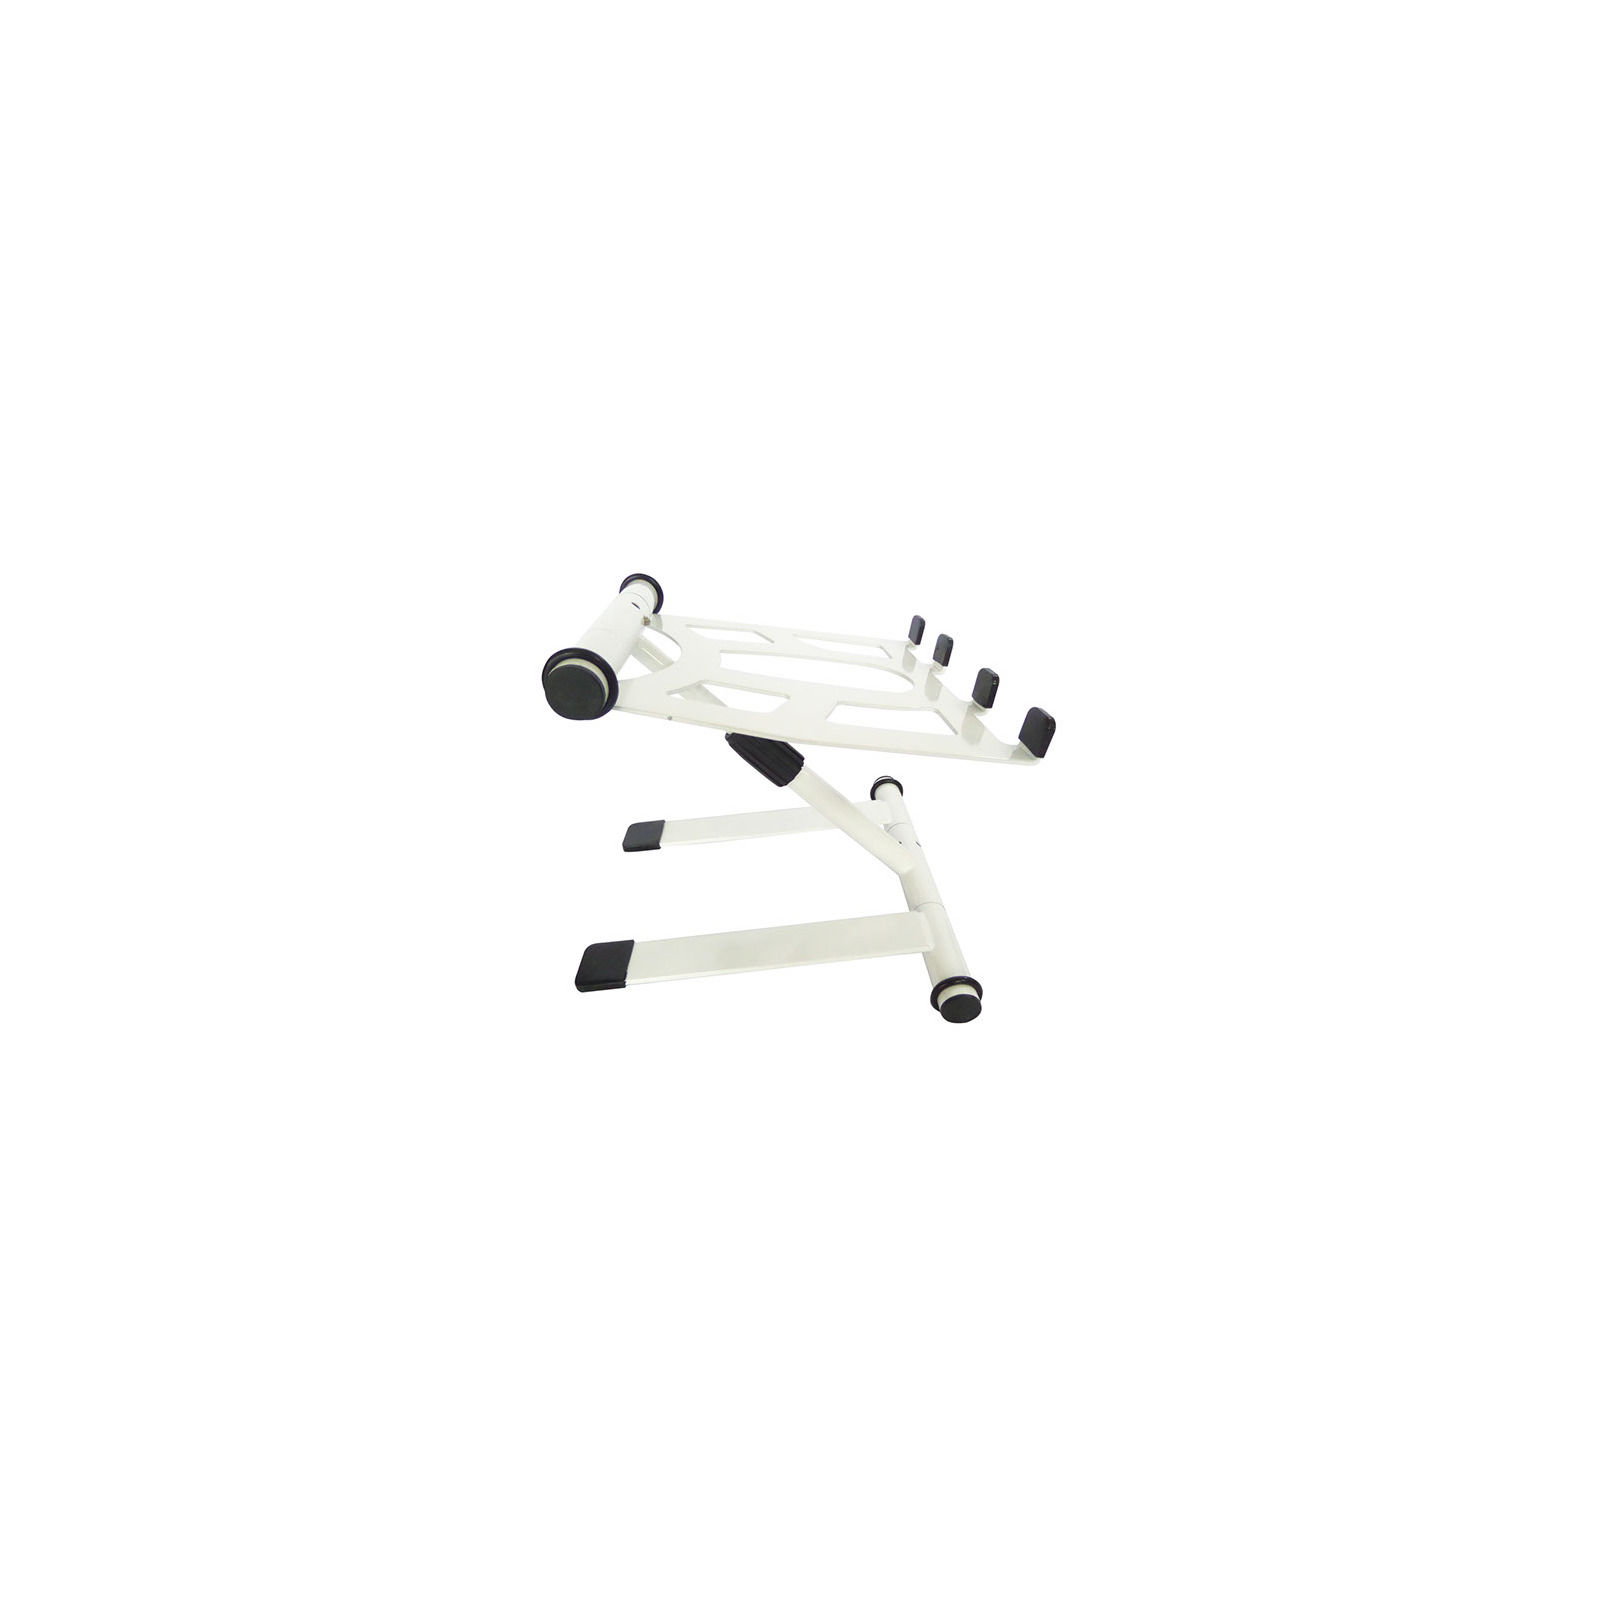 Novopro LS22M Multi Laptop Stand And Bag - White